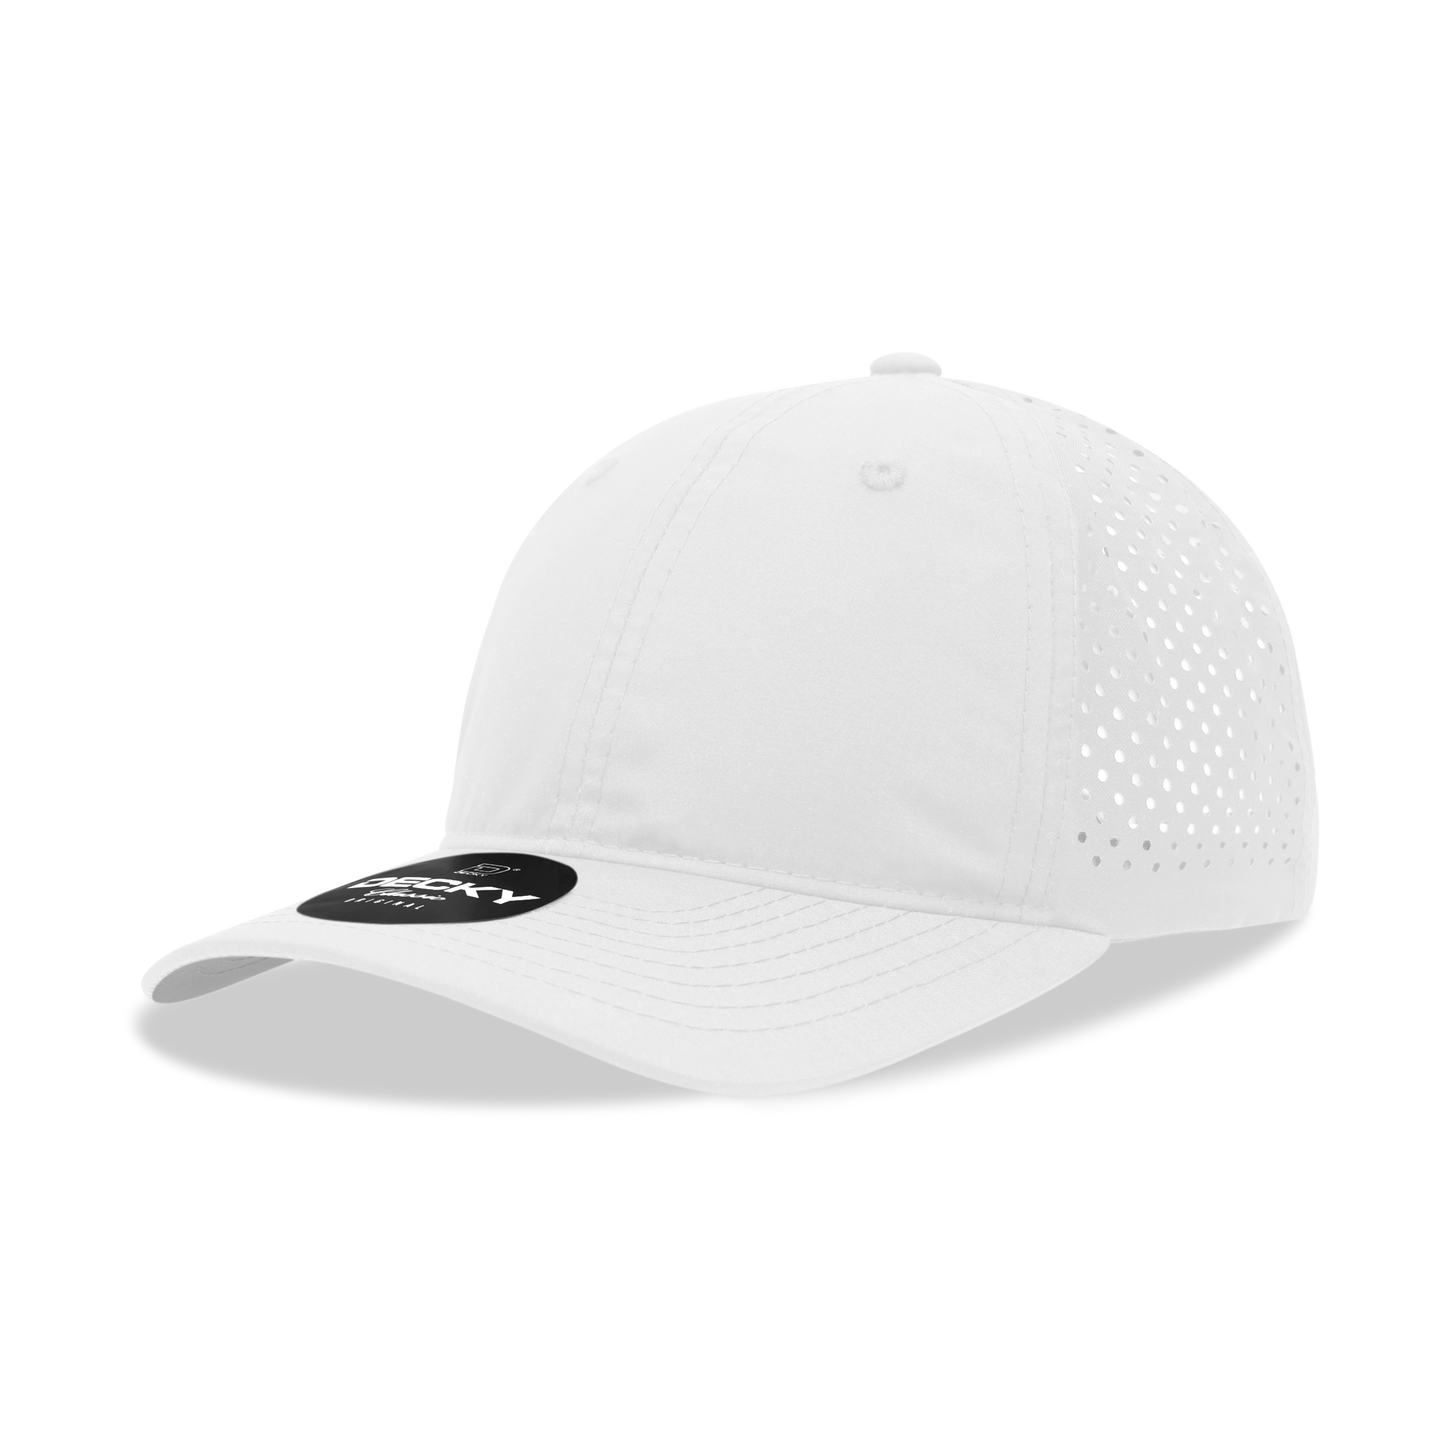 Decky 6224 6 Panel Low Profile Relaxed Perforated Performance Dad Hat